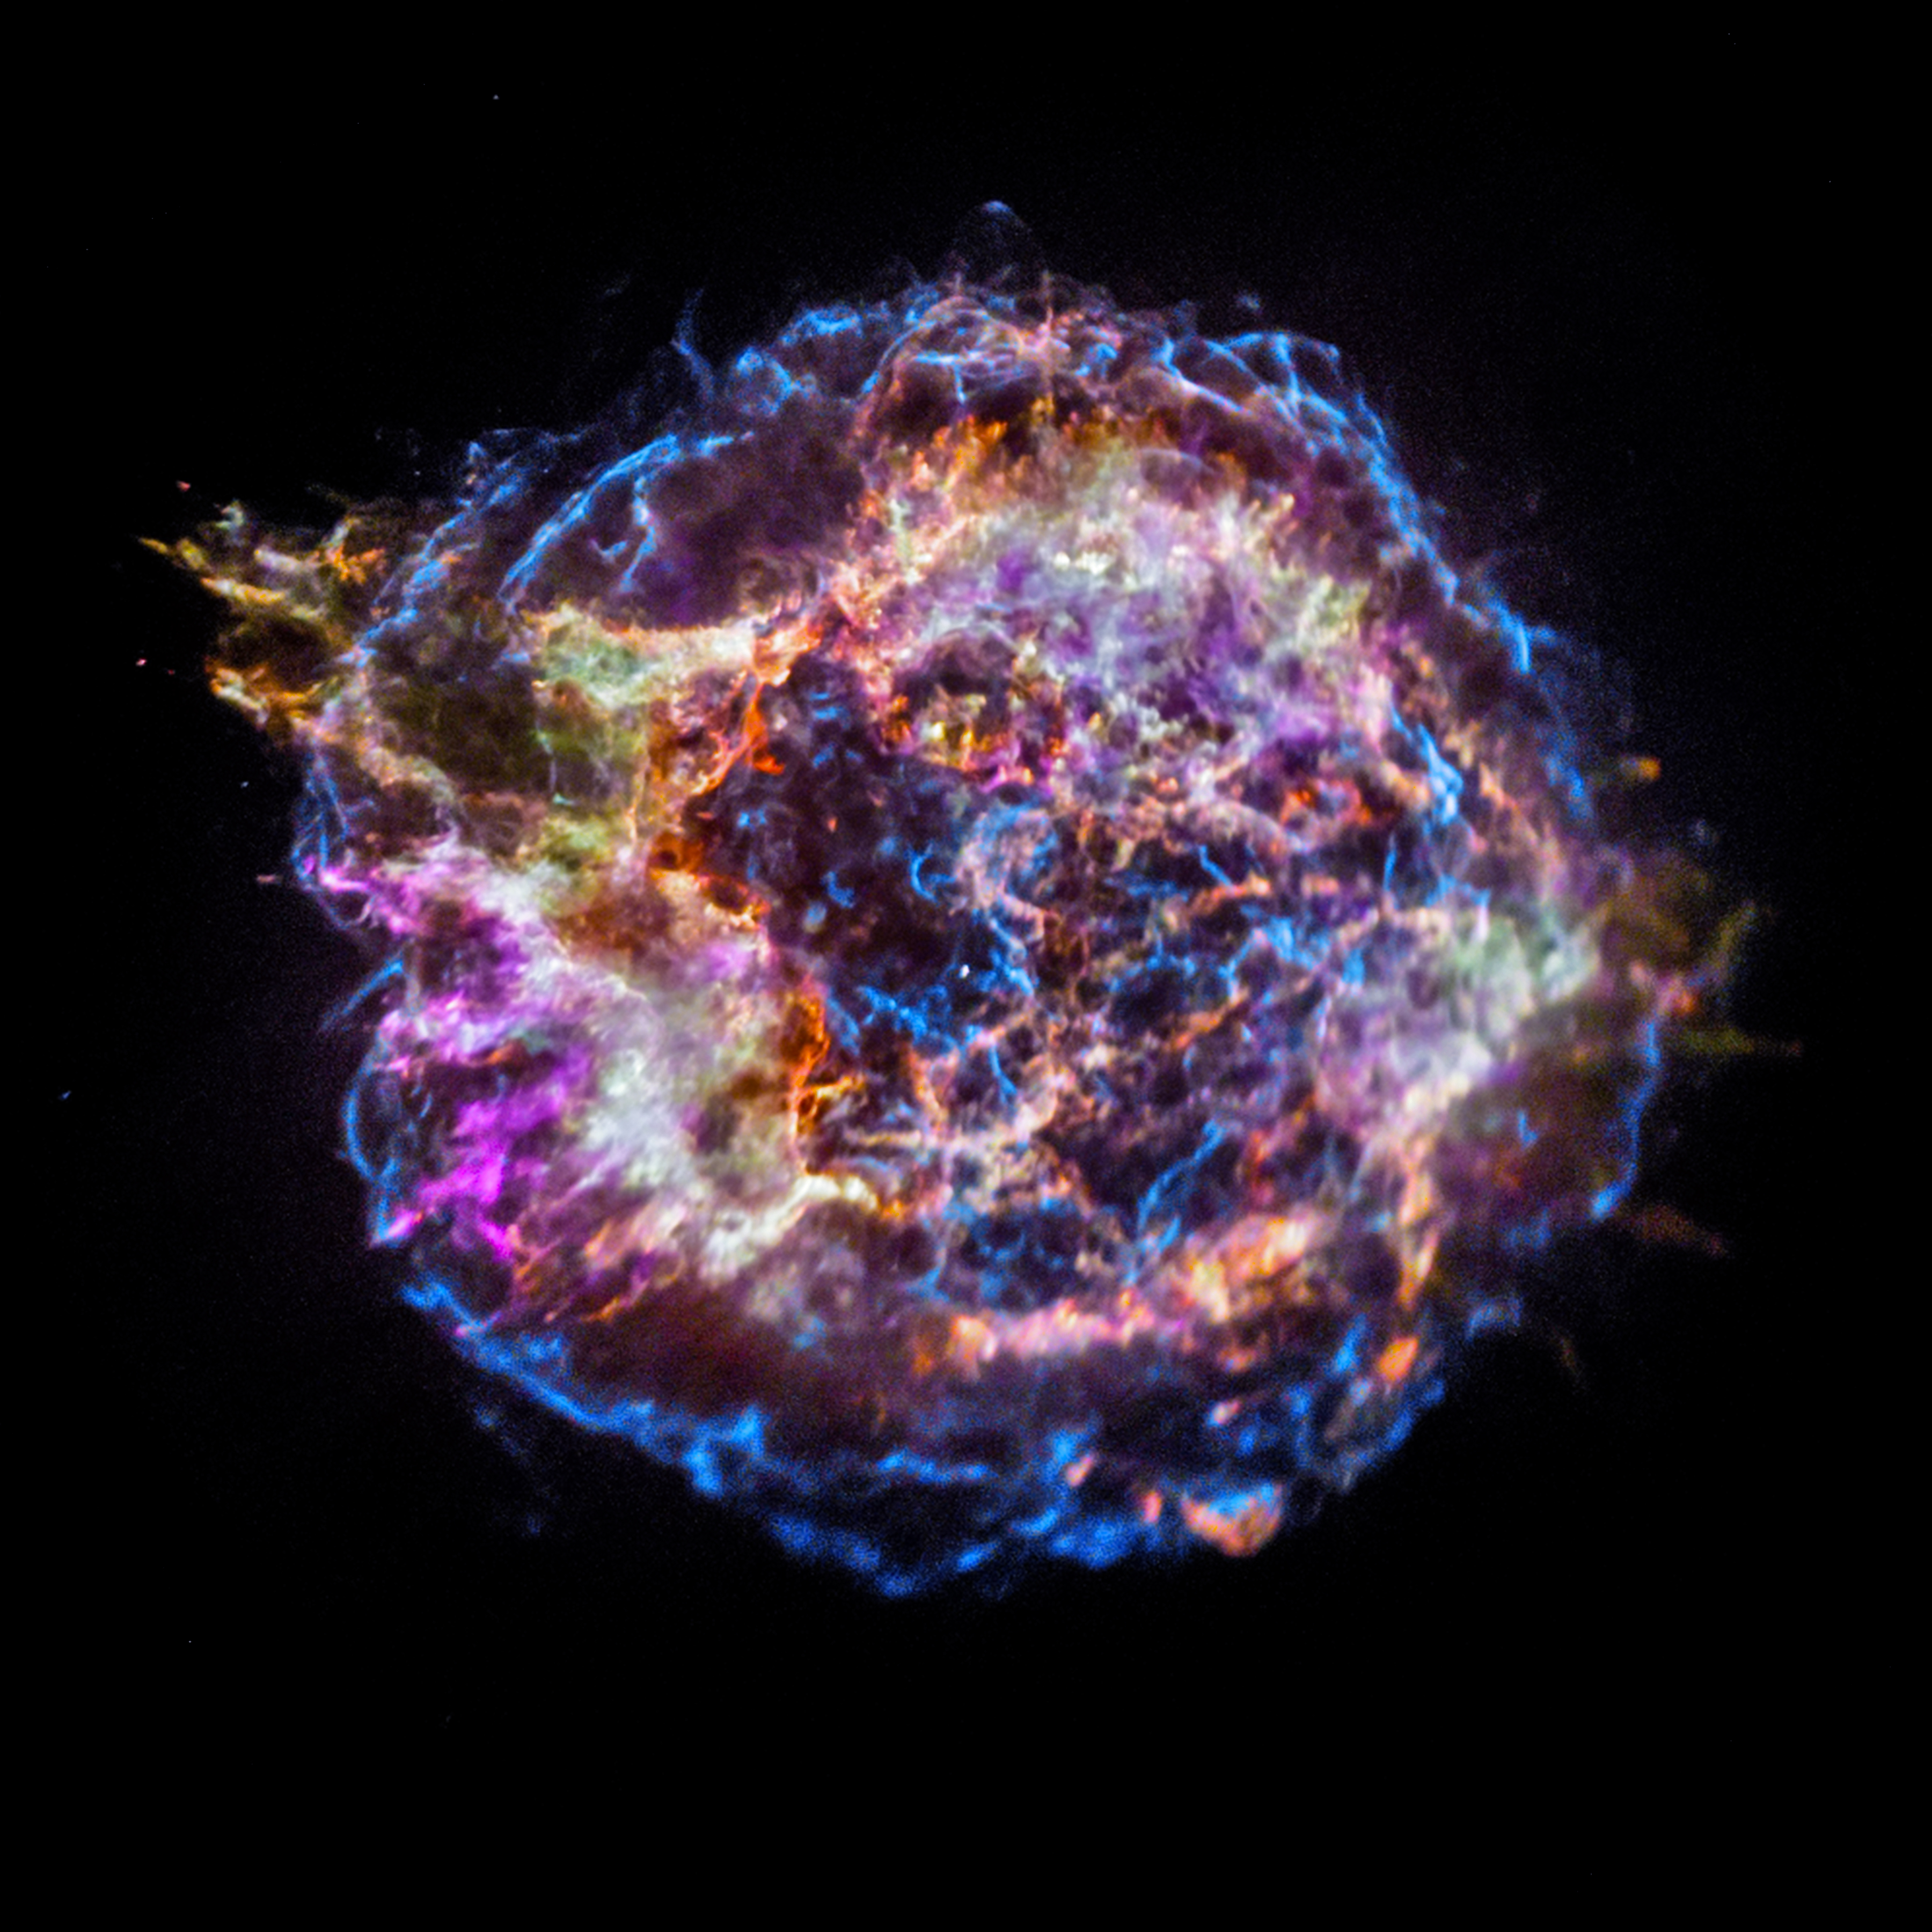 Chandra Reveals Elementary Nature of Cassiopeia A